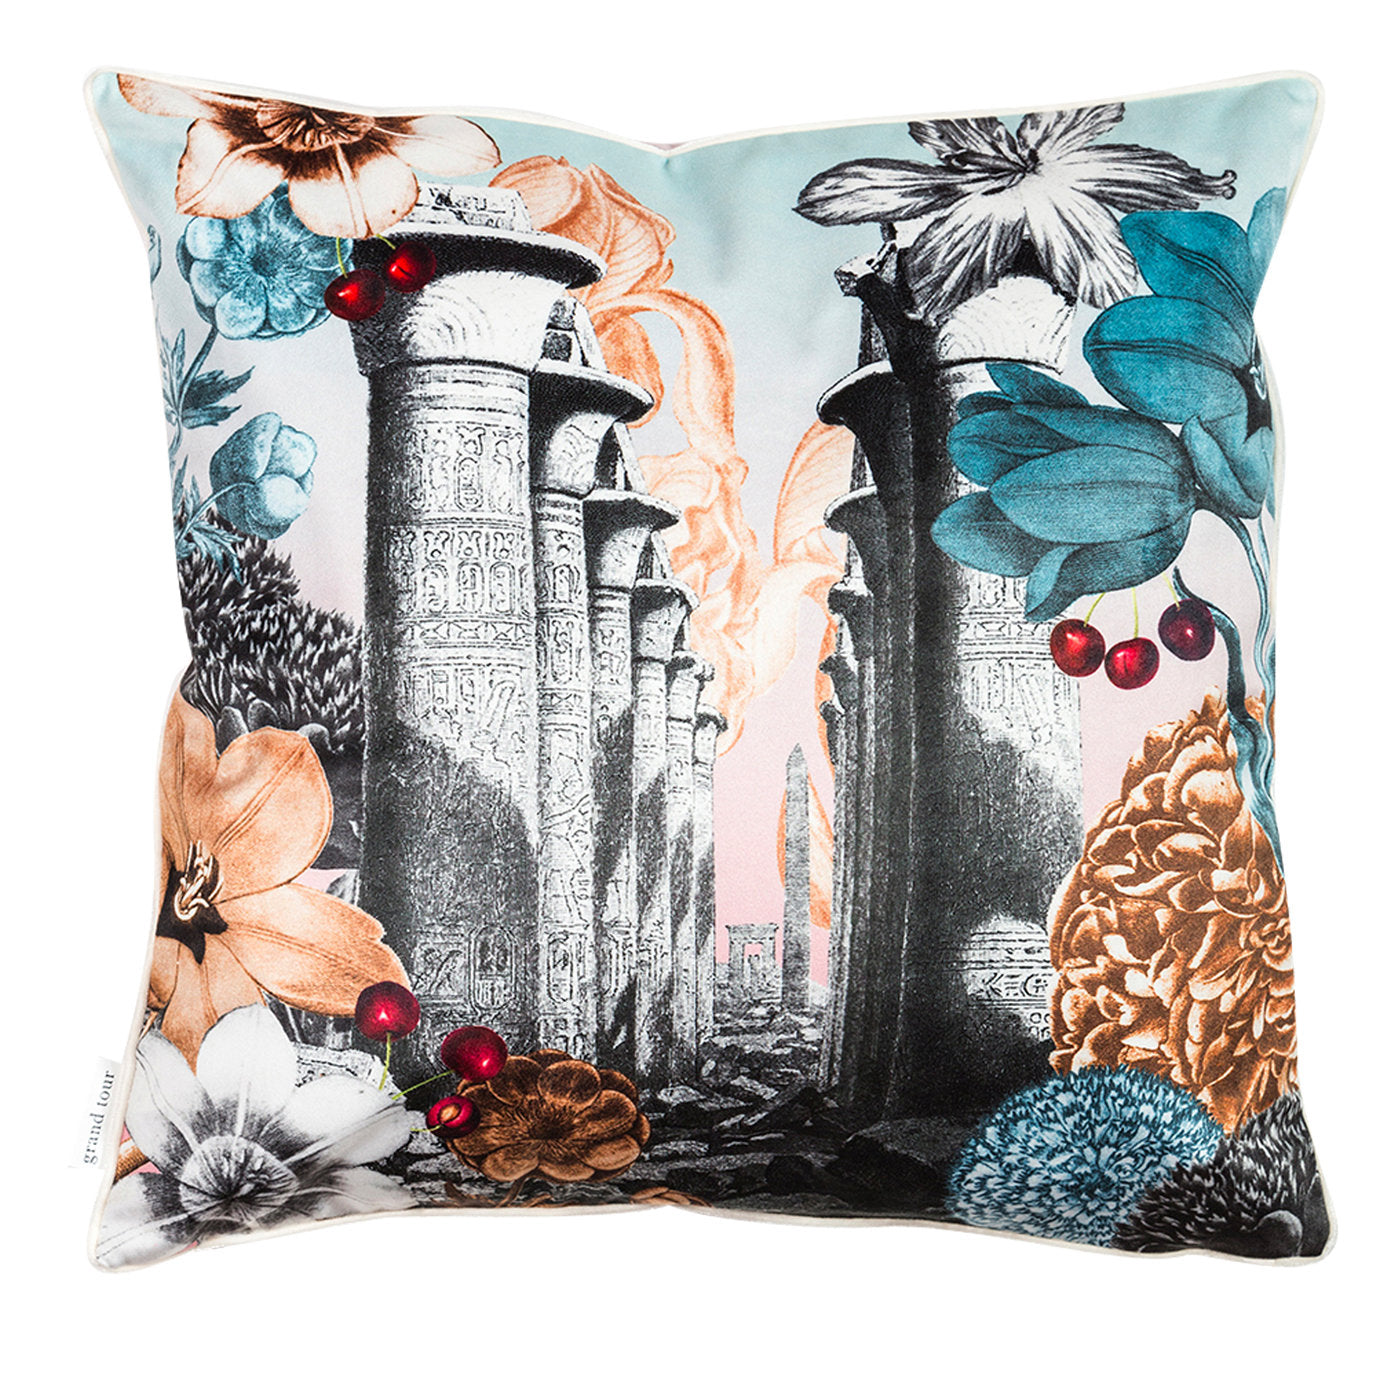 Cairo Velvet Cushion With Landscape And Flowers #5 - Main view